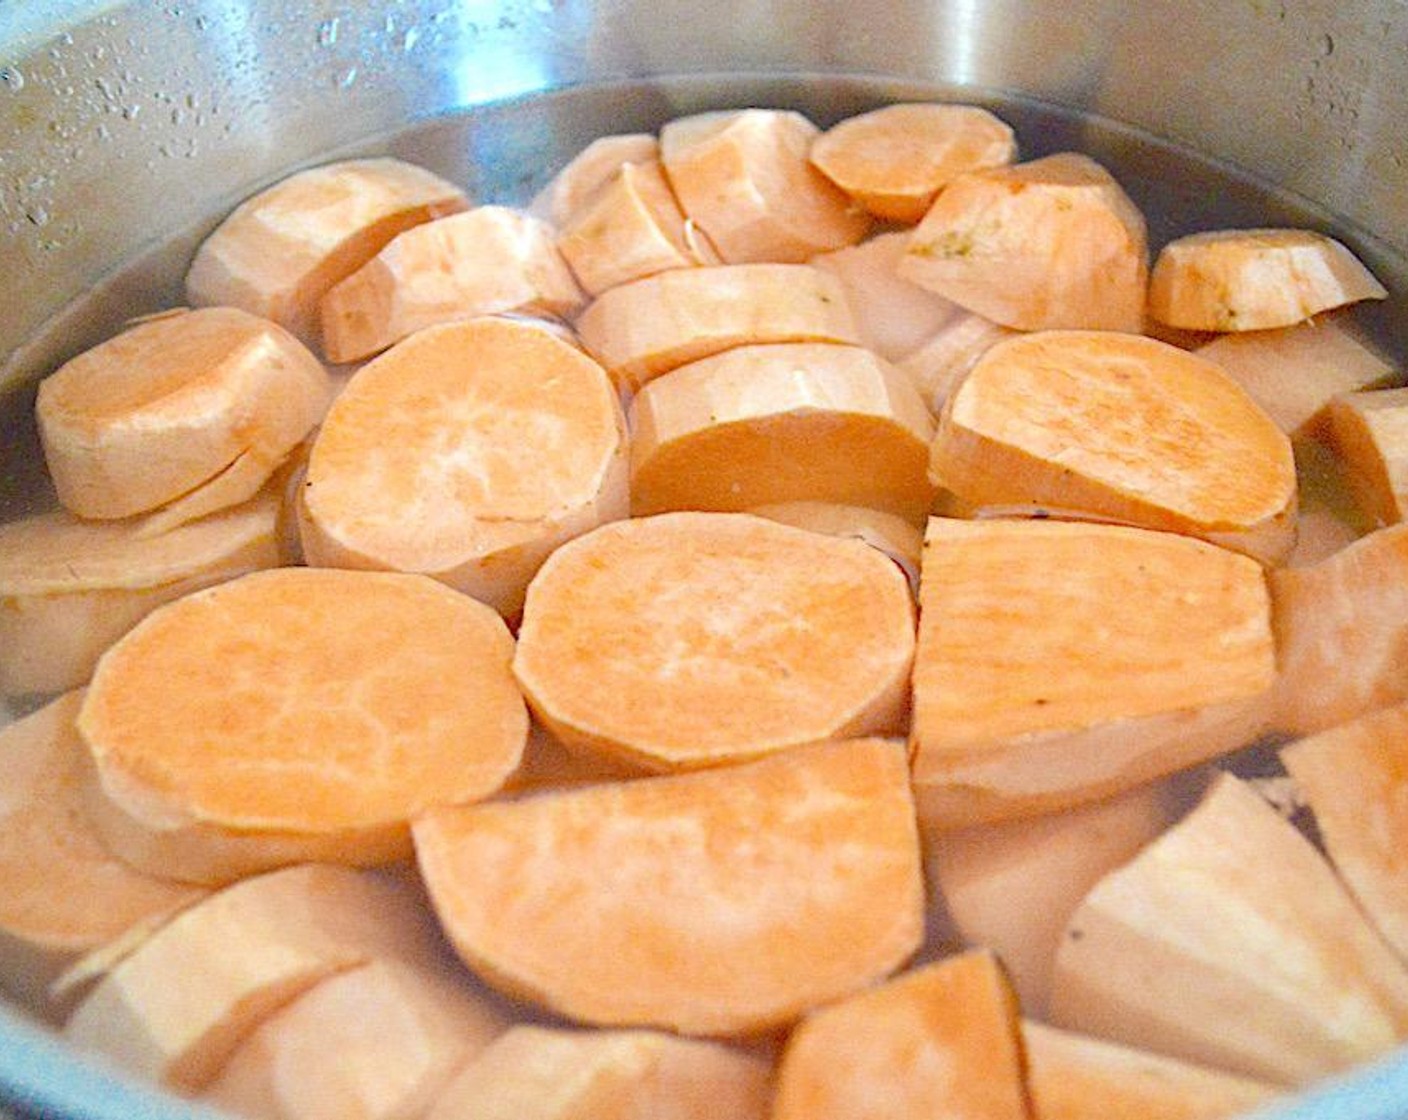 step 1 Transfer Sweet Potatoes (10) to a large pot and submerge them in cold water. Bring the pot to a boil and boil the sweet potatoes until they are fork tender for about 15 minutes or so. Drain them and dump them into a large mixing bowl.